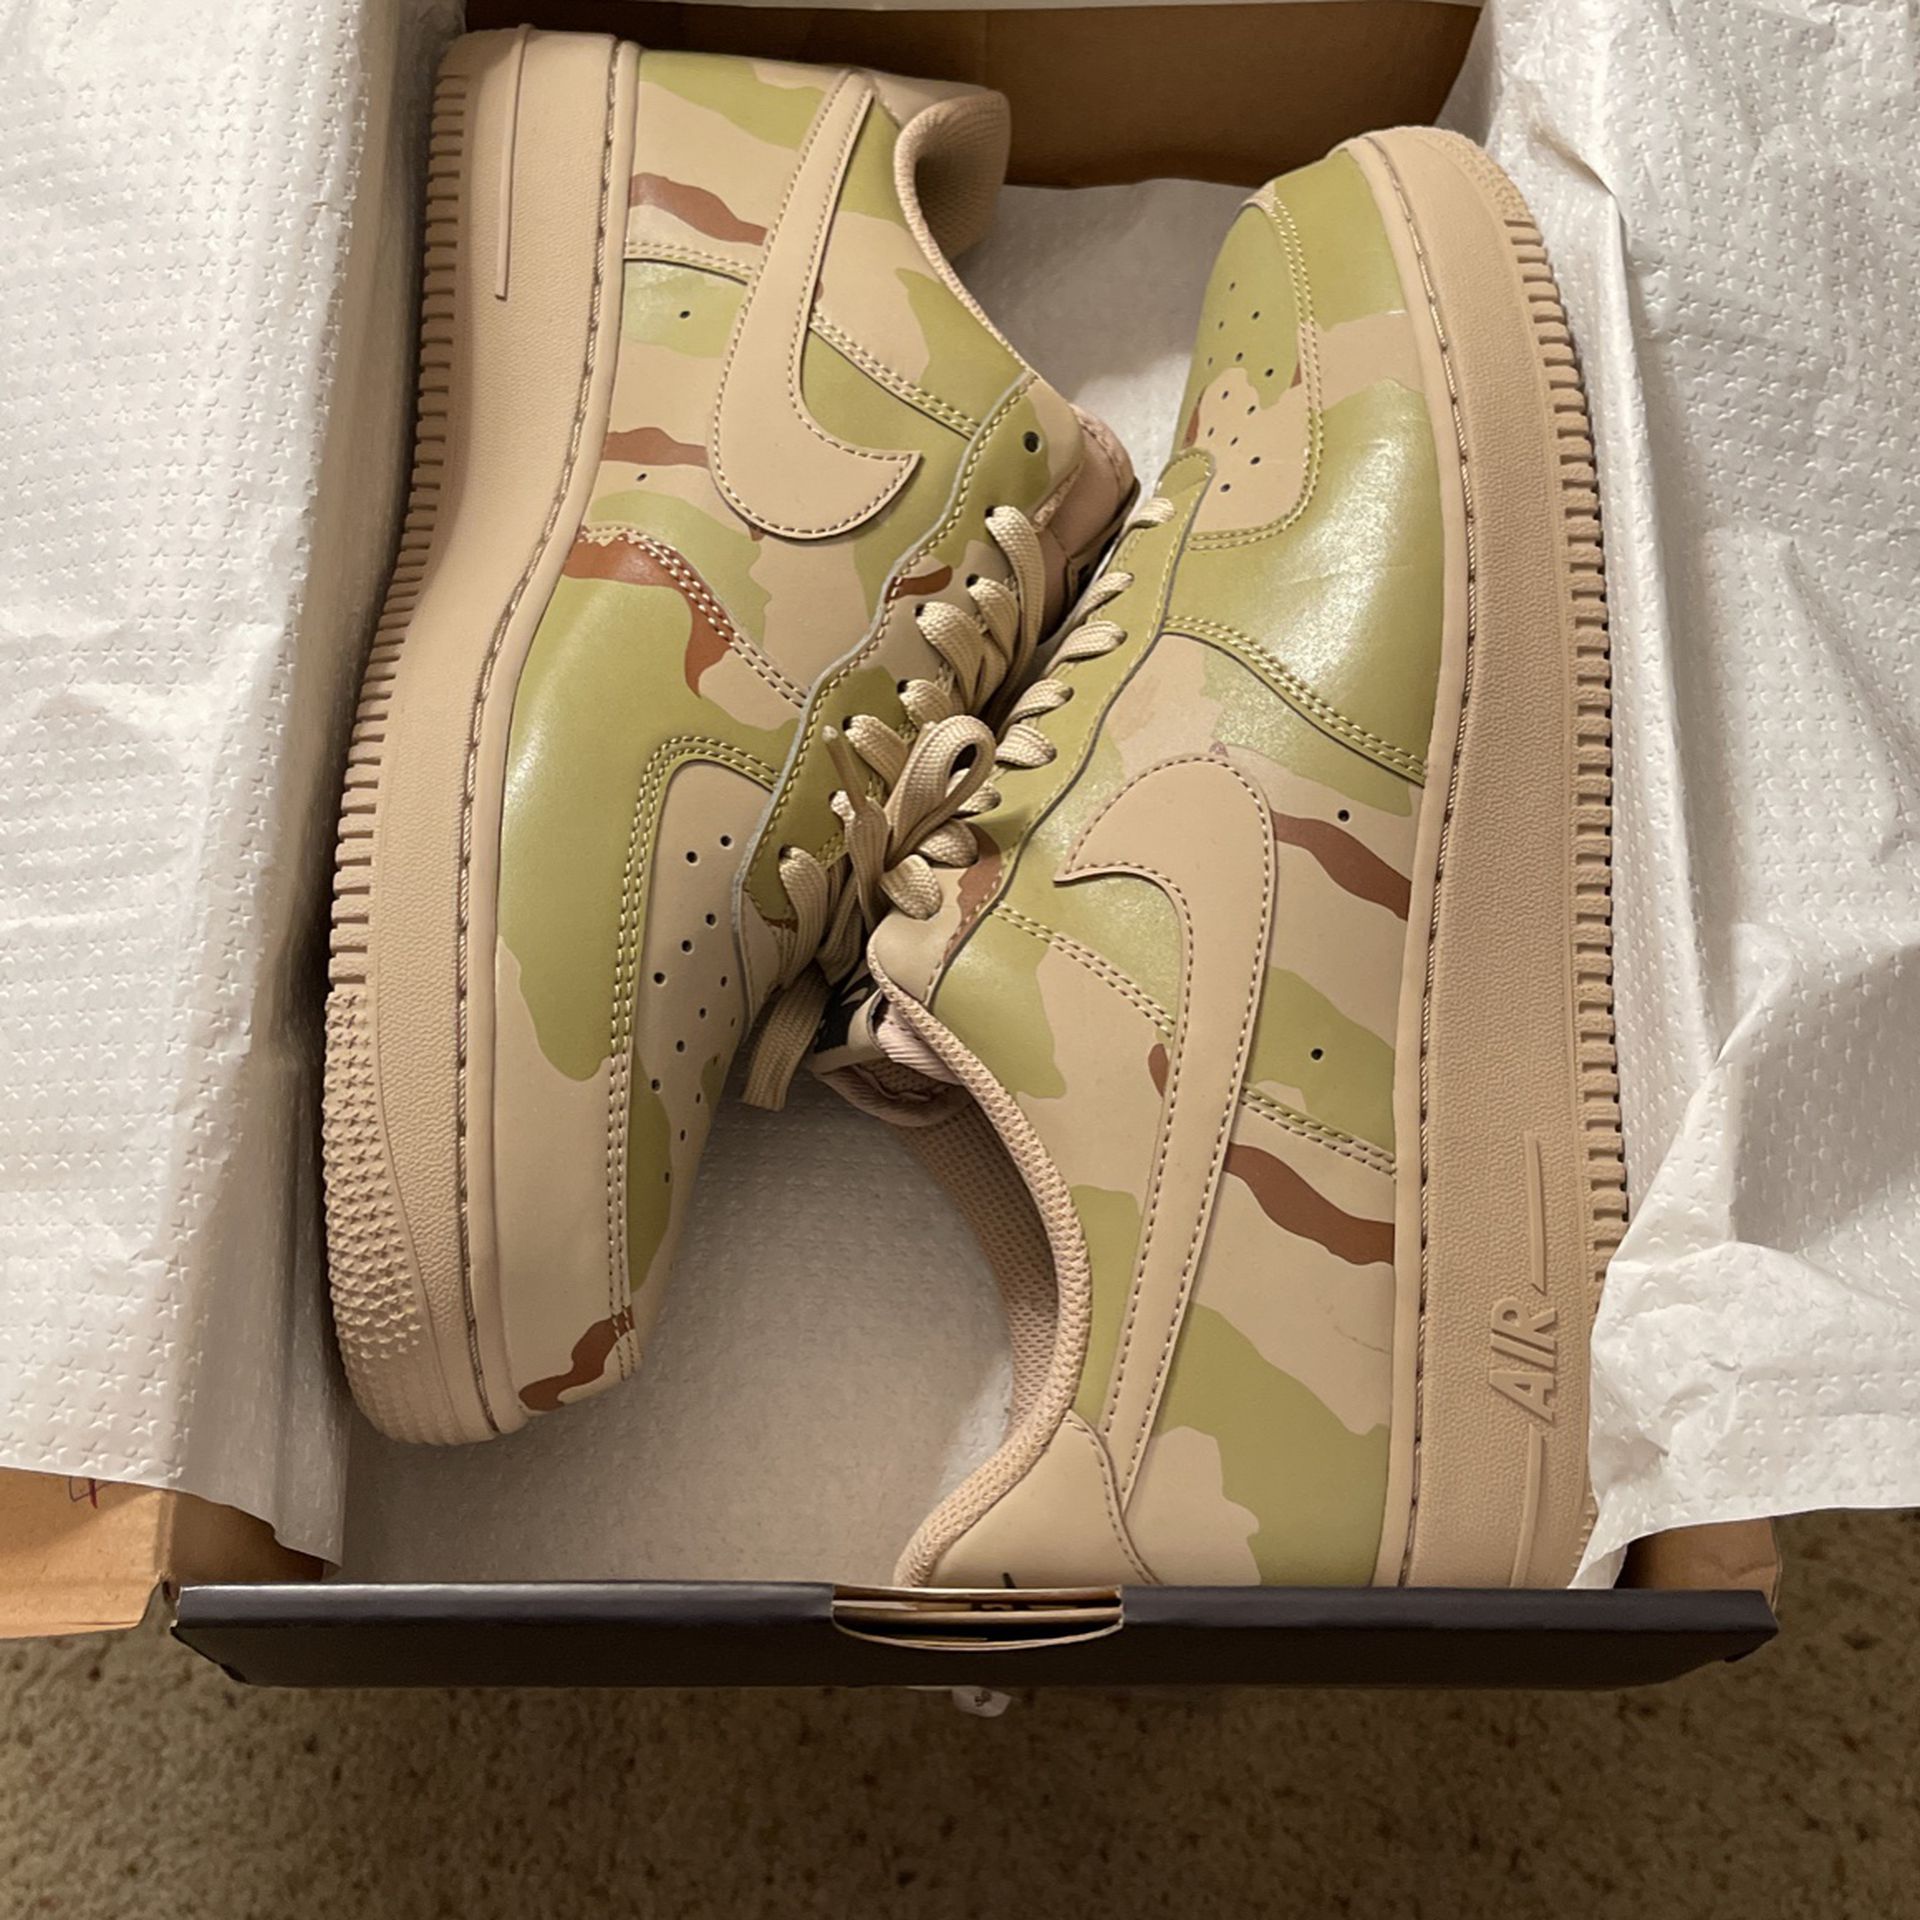 Nike Air Force 1 Low '07 LV8 'Reflective Desert Camo' Size 9.5 for